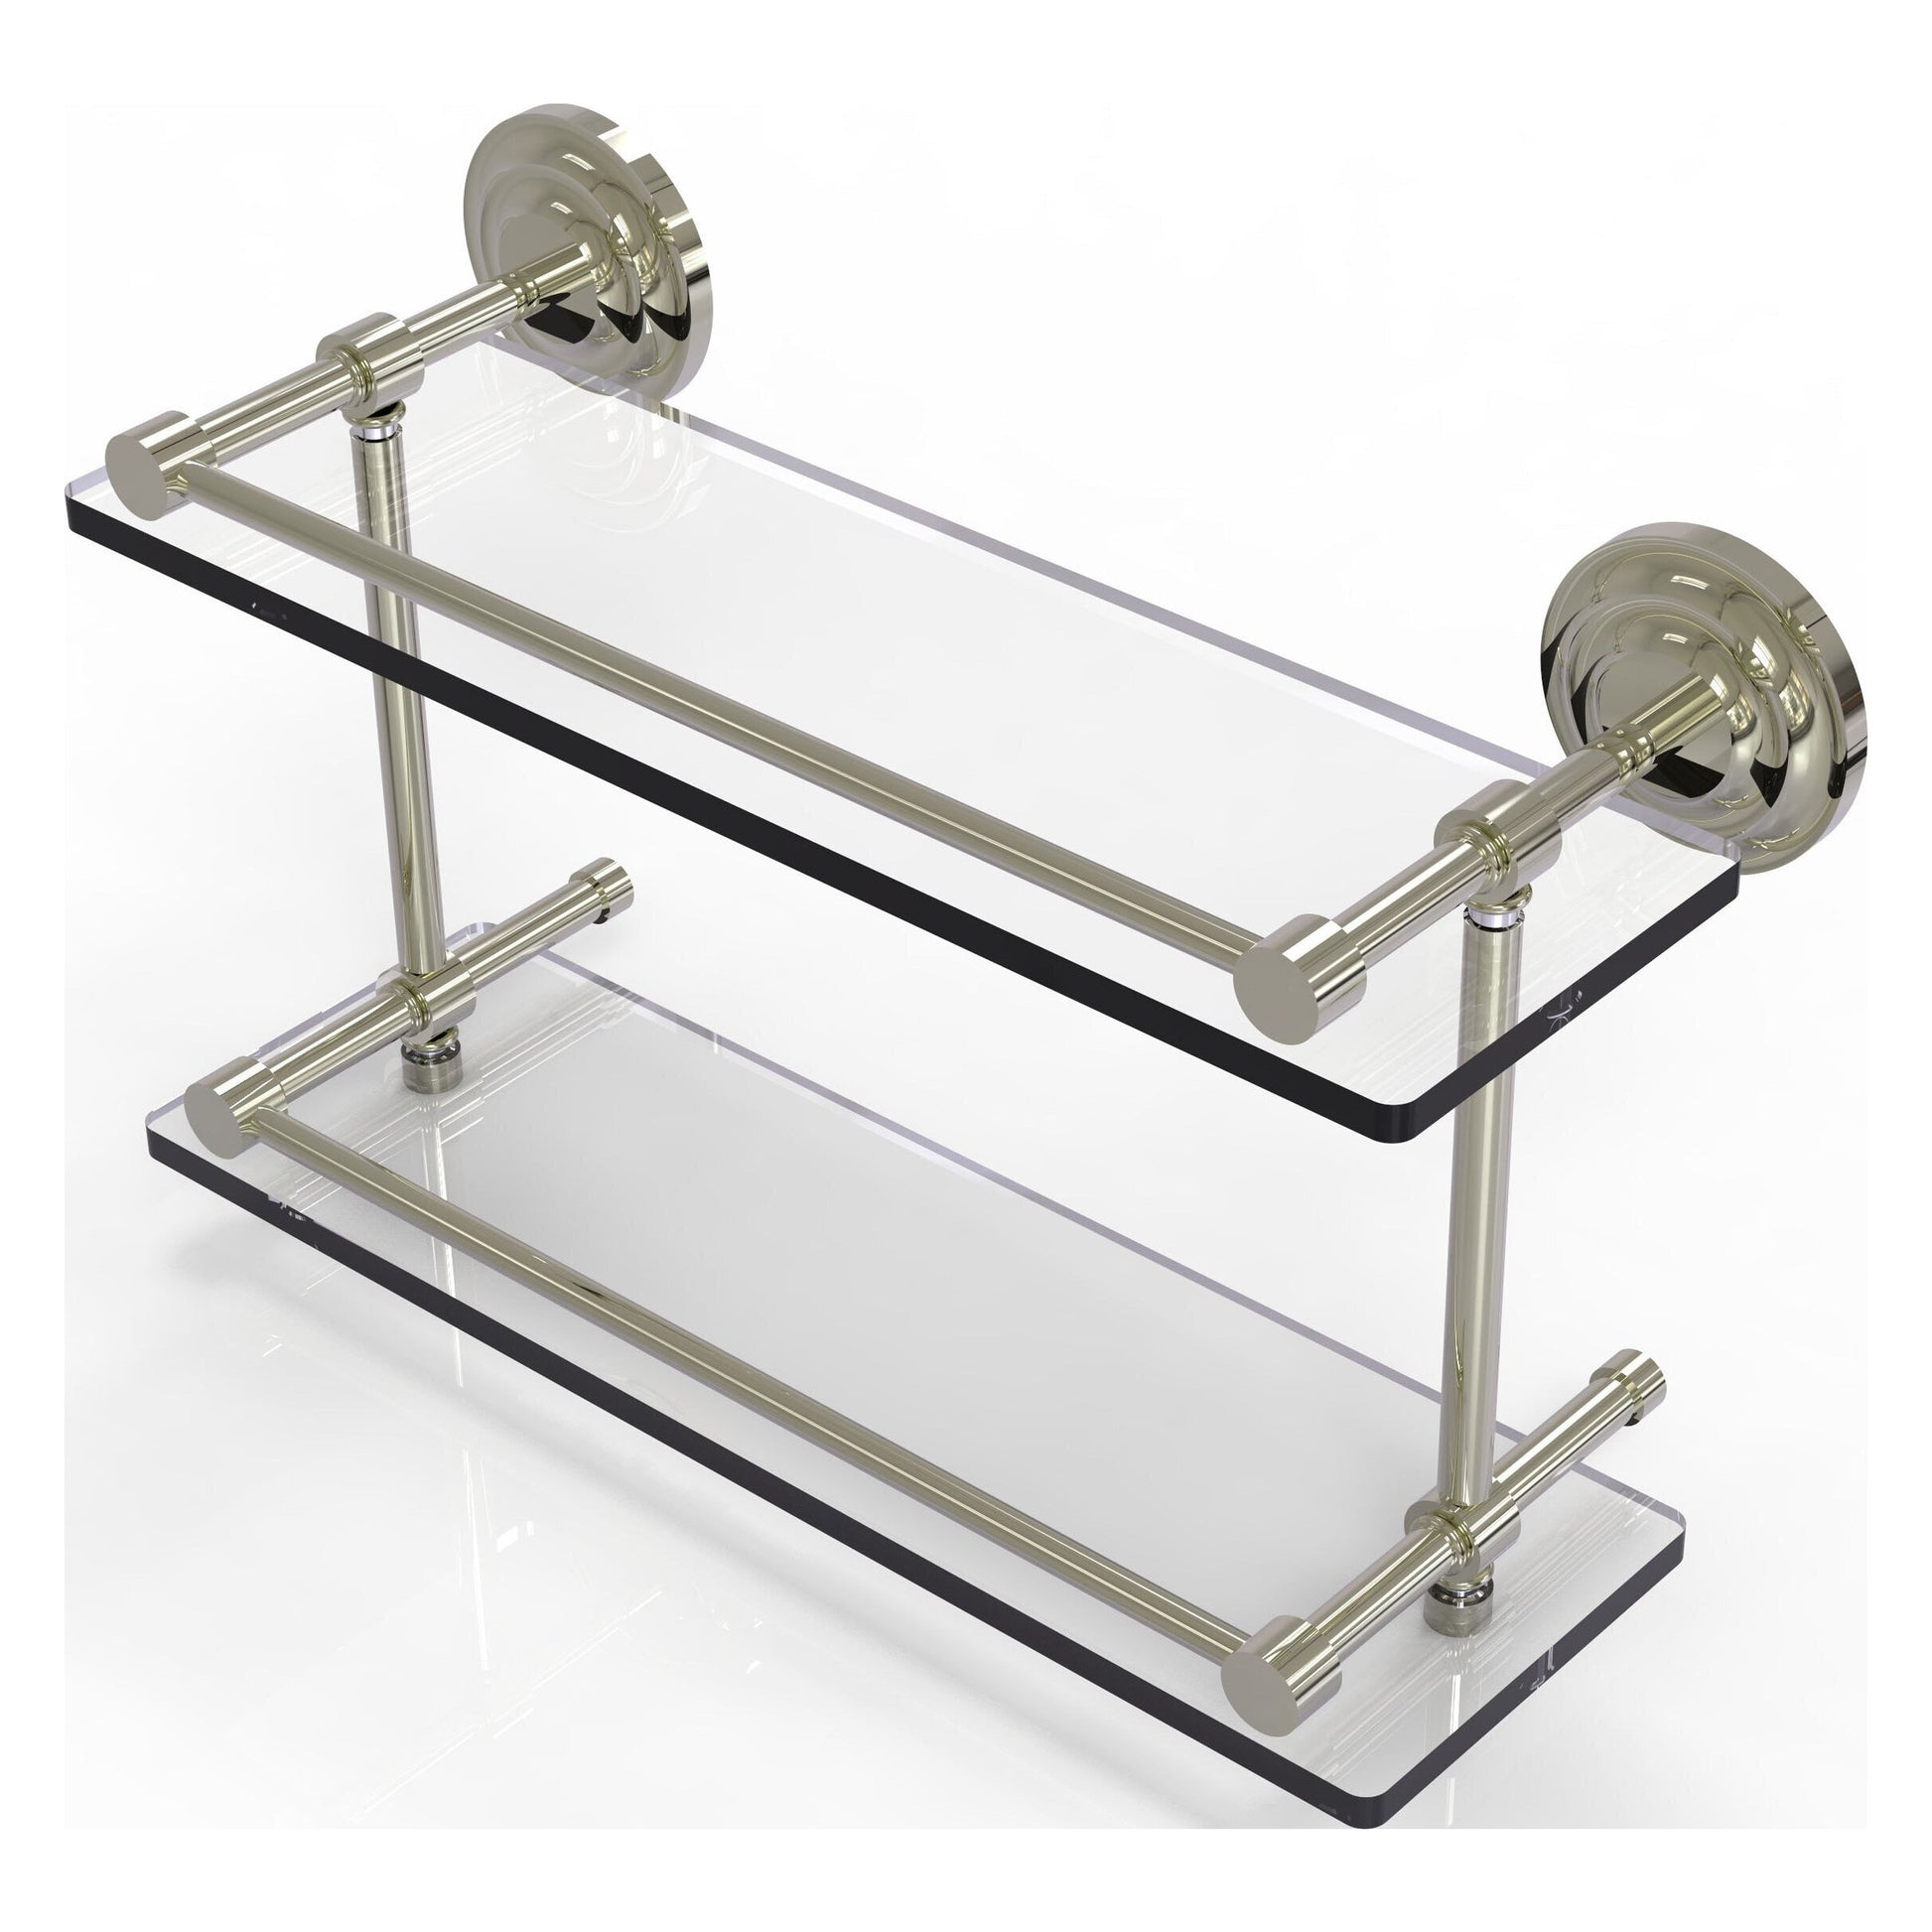 Allied Brass Que New 16" x 5" Polished Nickel Solid Brass 16-Inch Double Glass Shelf With Gallery Rail